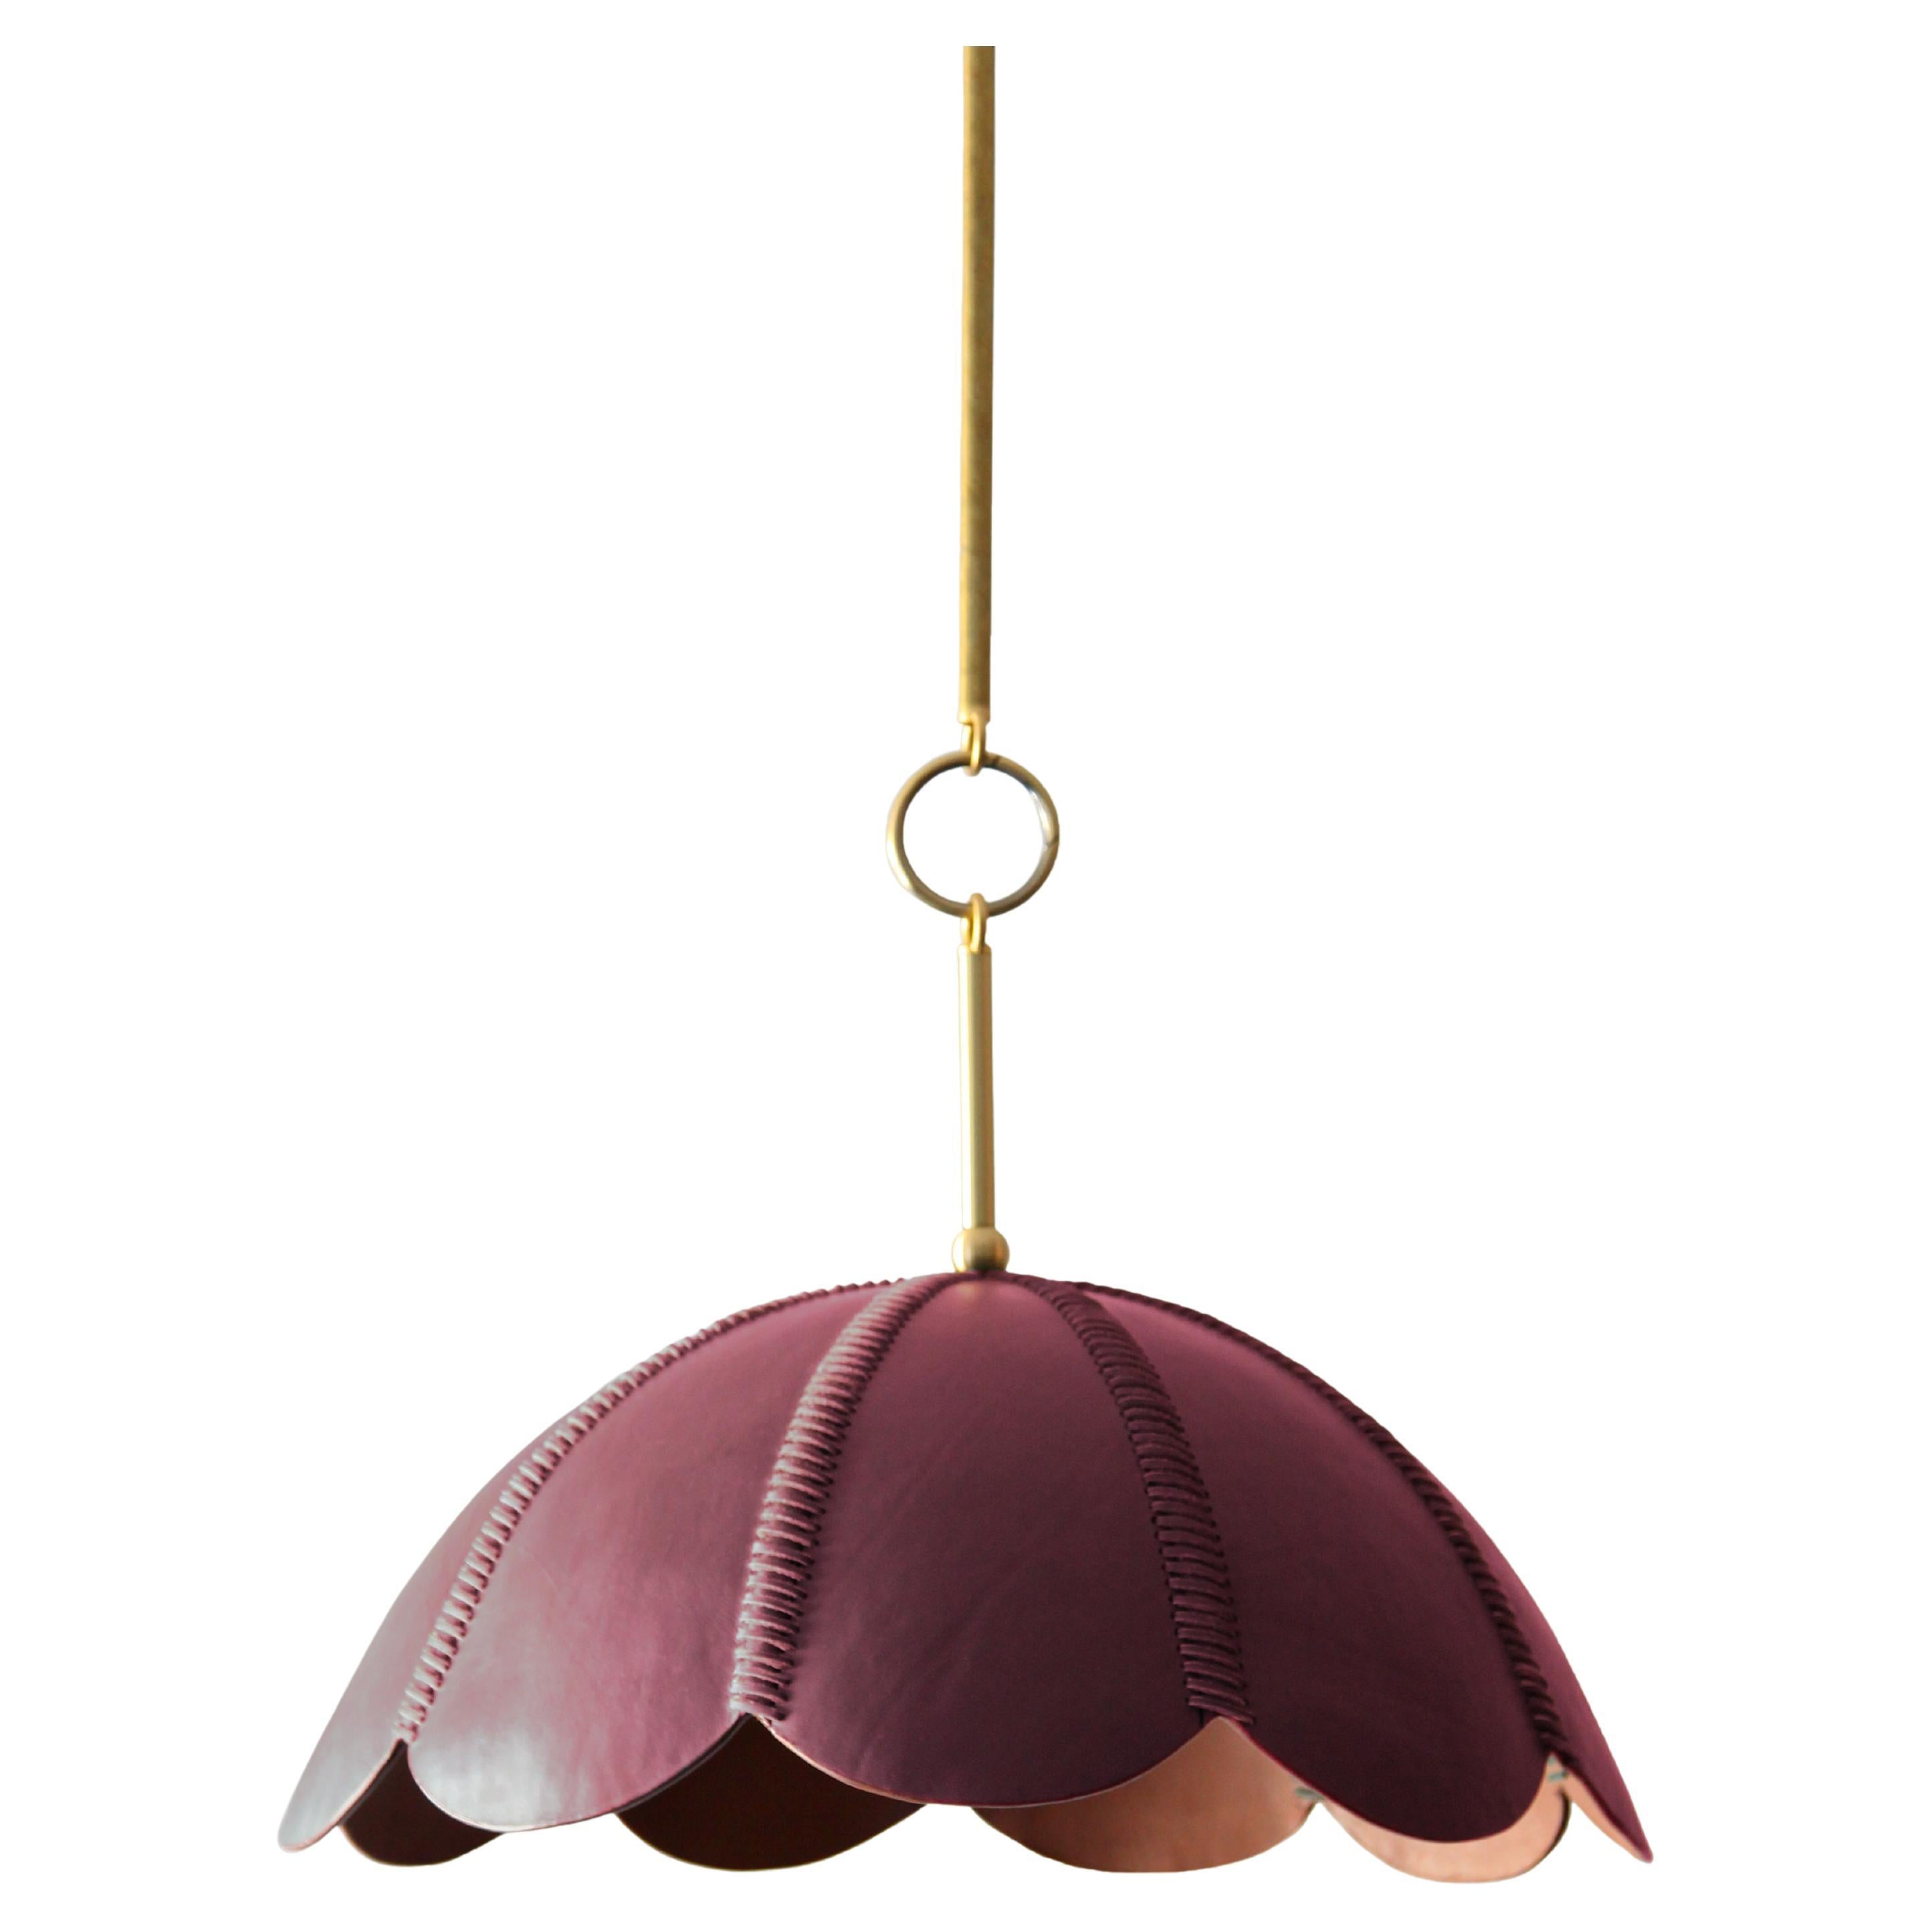 Leather Pendant Light in Berry, Capa II, Talabartero Collection Saddle Lamp For Sale